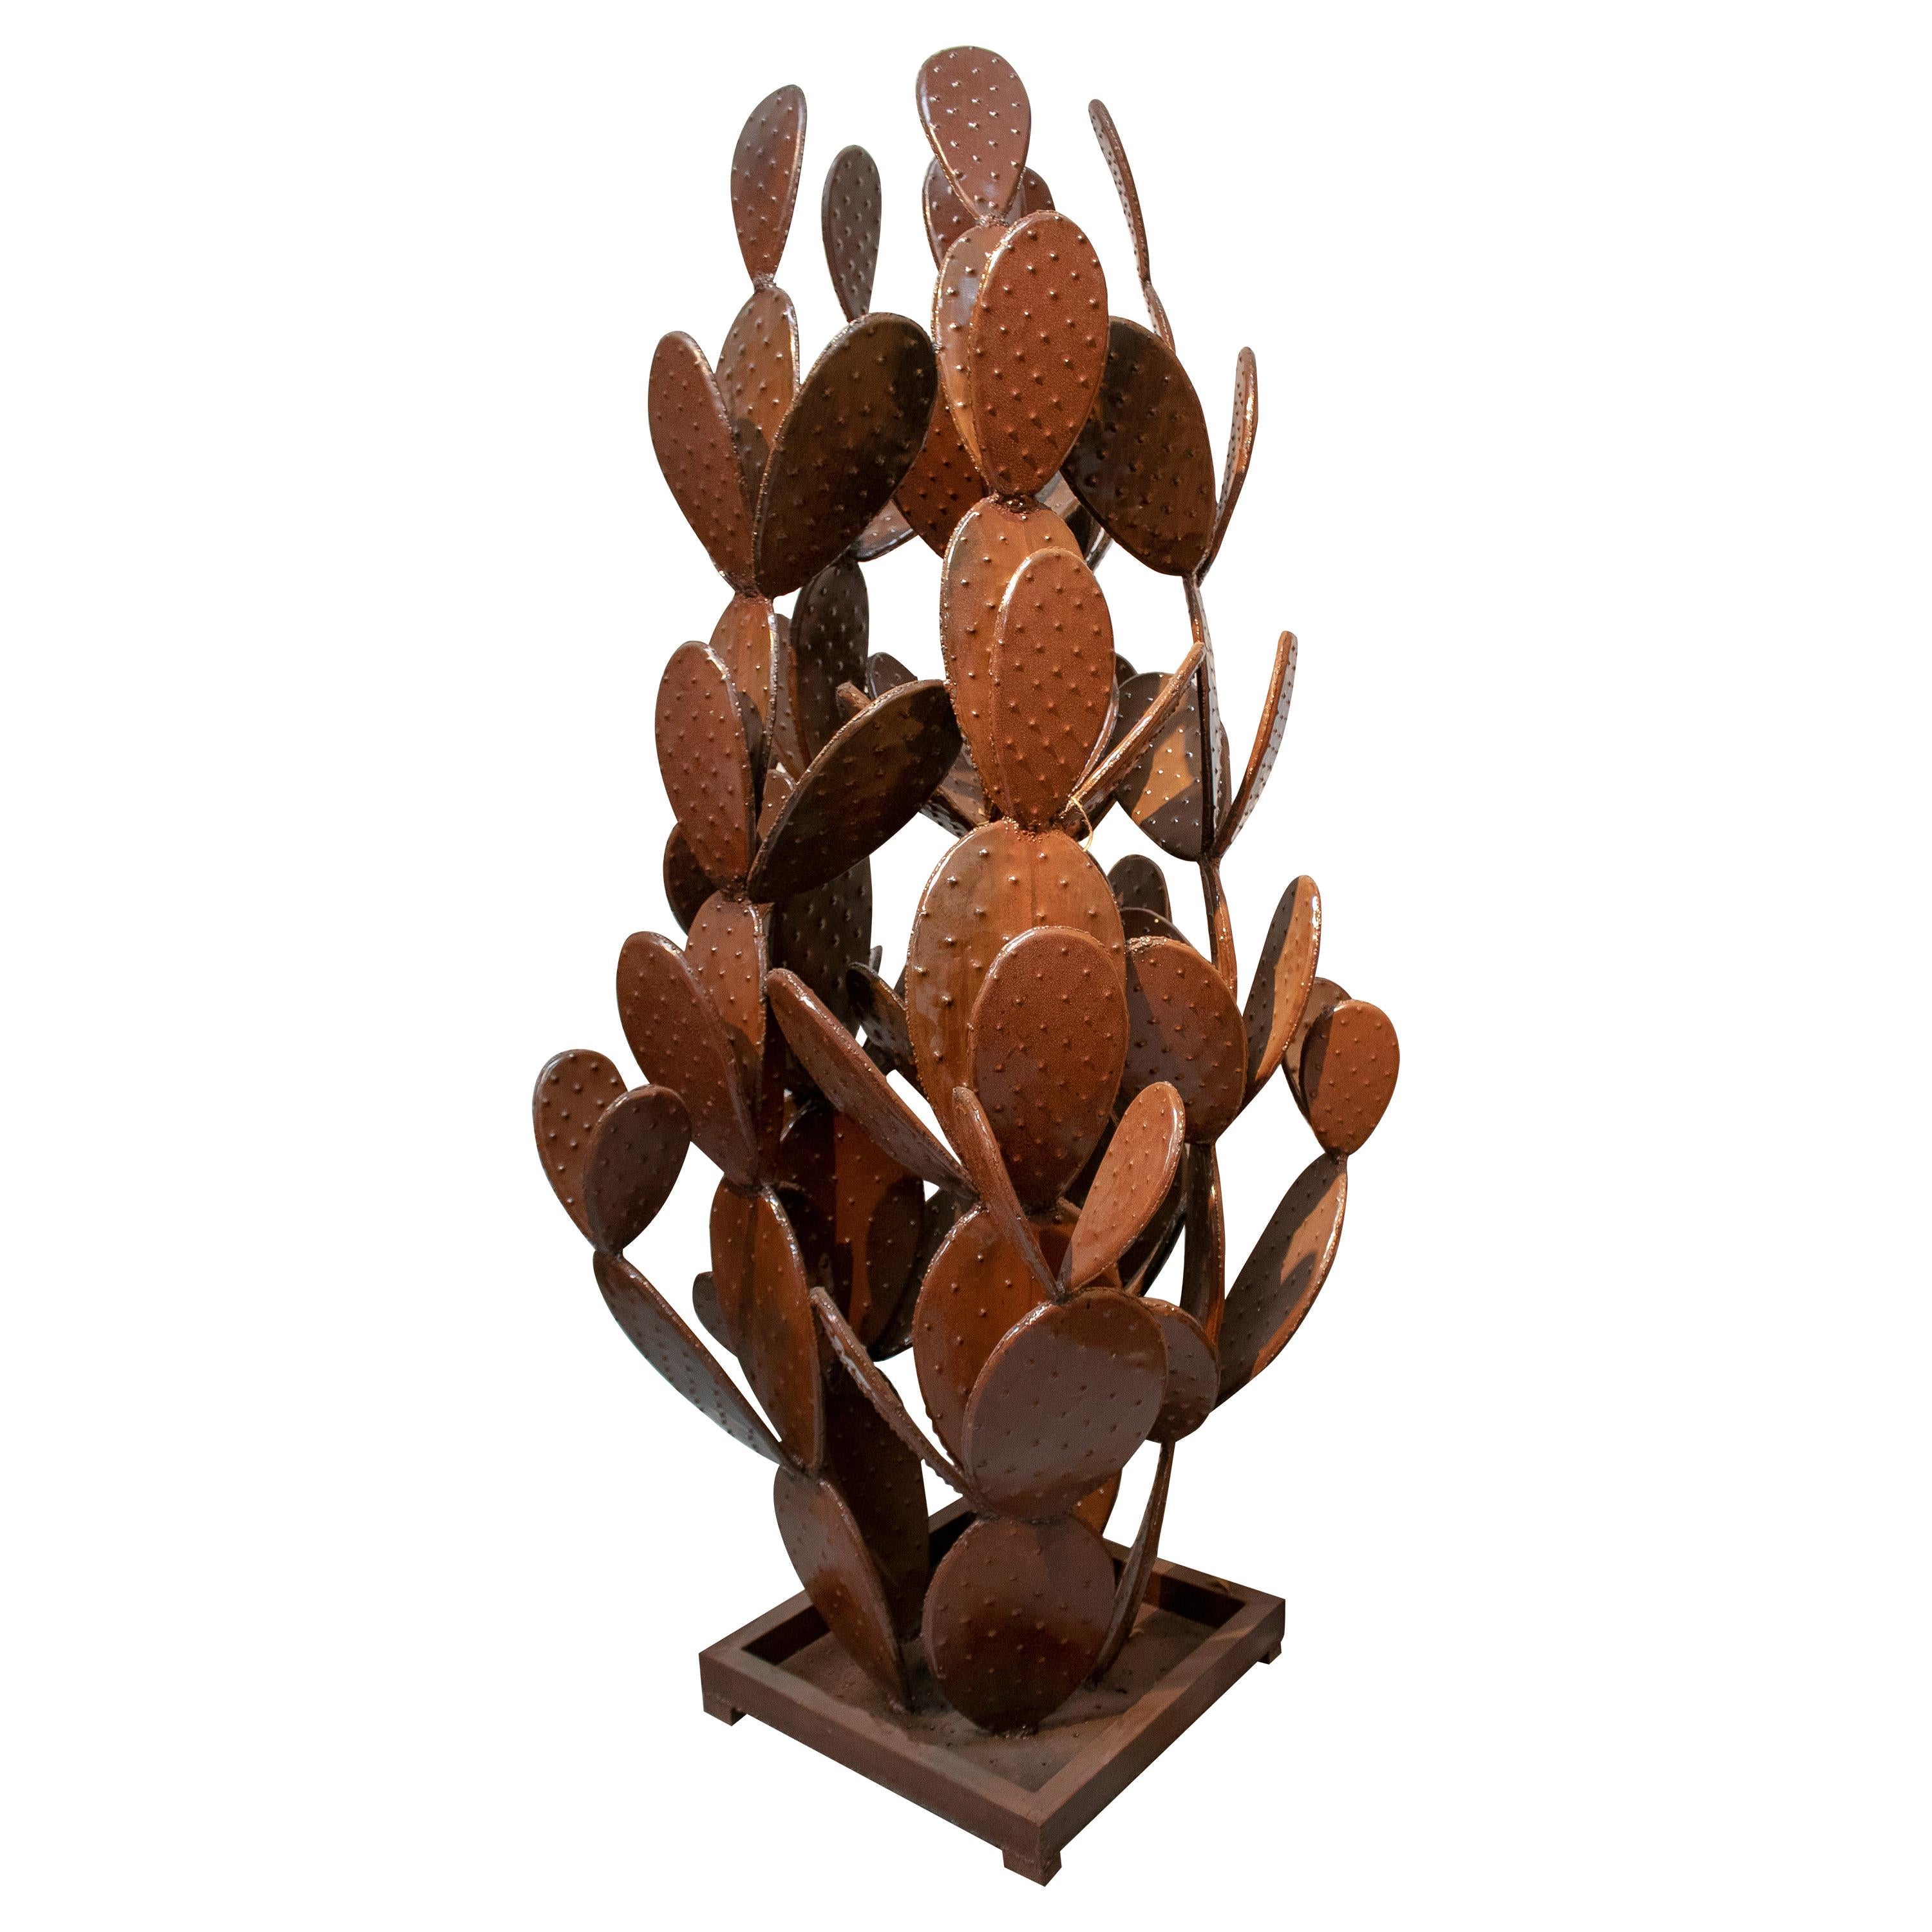 1990s French Iron Cactus Sculpture For Sale